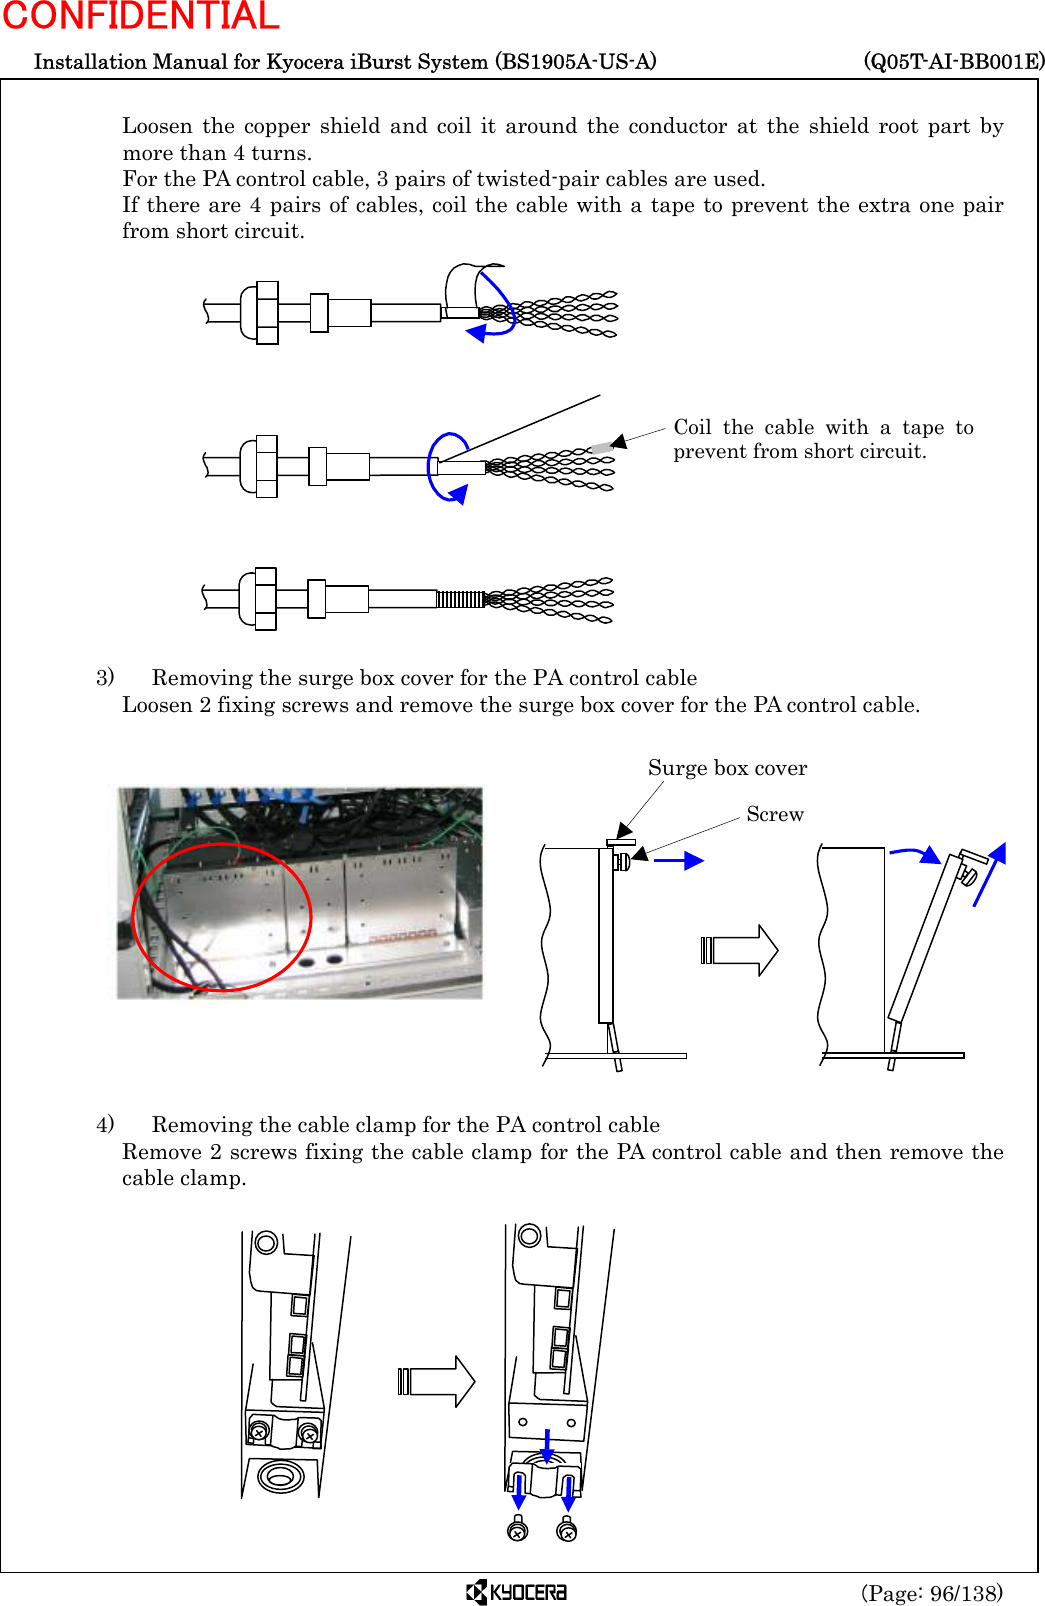  Installation Manual for Kyocera iBurst System (BS1905A-US-A)     (Q05T-AI-BB001E) (Page: 96/138) CONFIDENTIAL  Loosen the copper shield and coil it around the conductor at the shield root part by more than 4 turns. For the PA control cable, 3 pairs of twisted-pair cables are used. If there are 4 pairs of cables, coil the cable with a tape to prevent the extra one pair from short circuit.                 3)    Removing the surge box cover for the PA control cable Loosen 2 fixing screws and remove the surge box cover for the PA control cable.                4)    Removing the cable clamp for the PA control cable Remove 2 screws fixing the cable clamp for the PA control cable and then remove the cable clamp.             Coil the cable with a tape toprevent from short circuit. Surge box cover Screw 